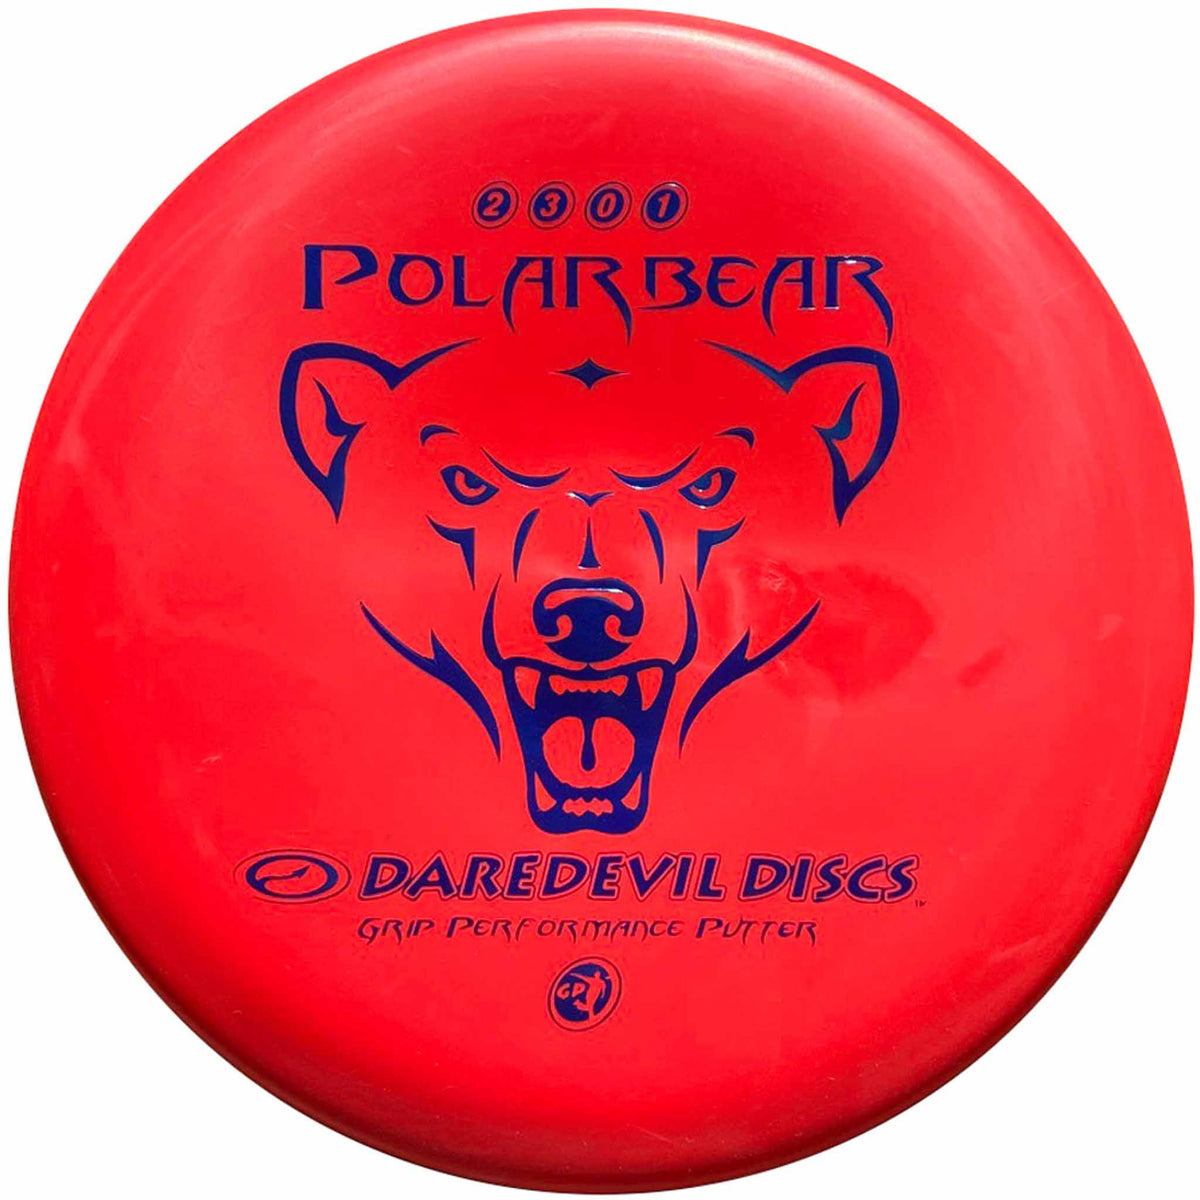 Daredevil Discs Extra Grip Performance Polar Bear putter and approach Red